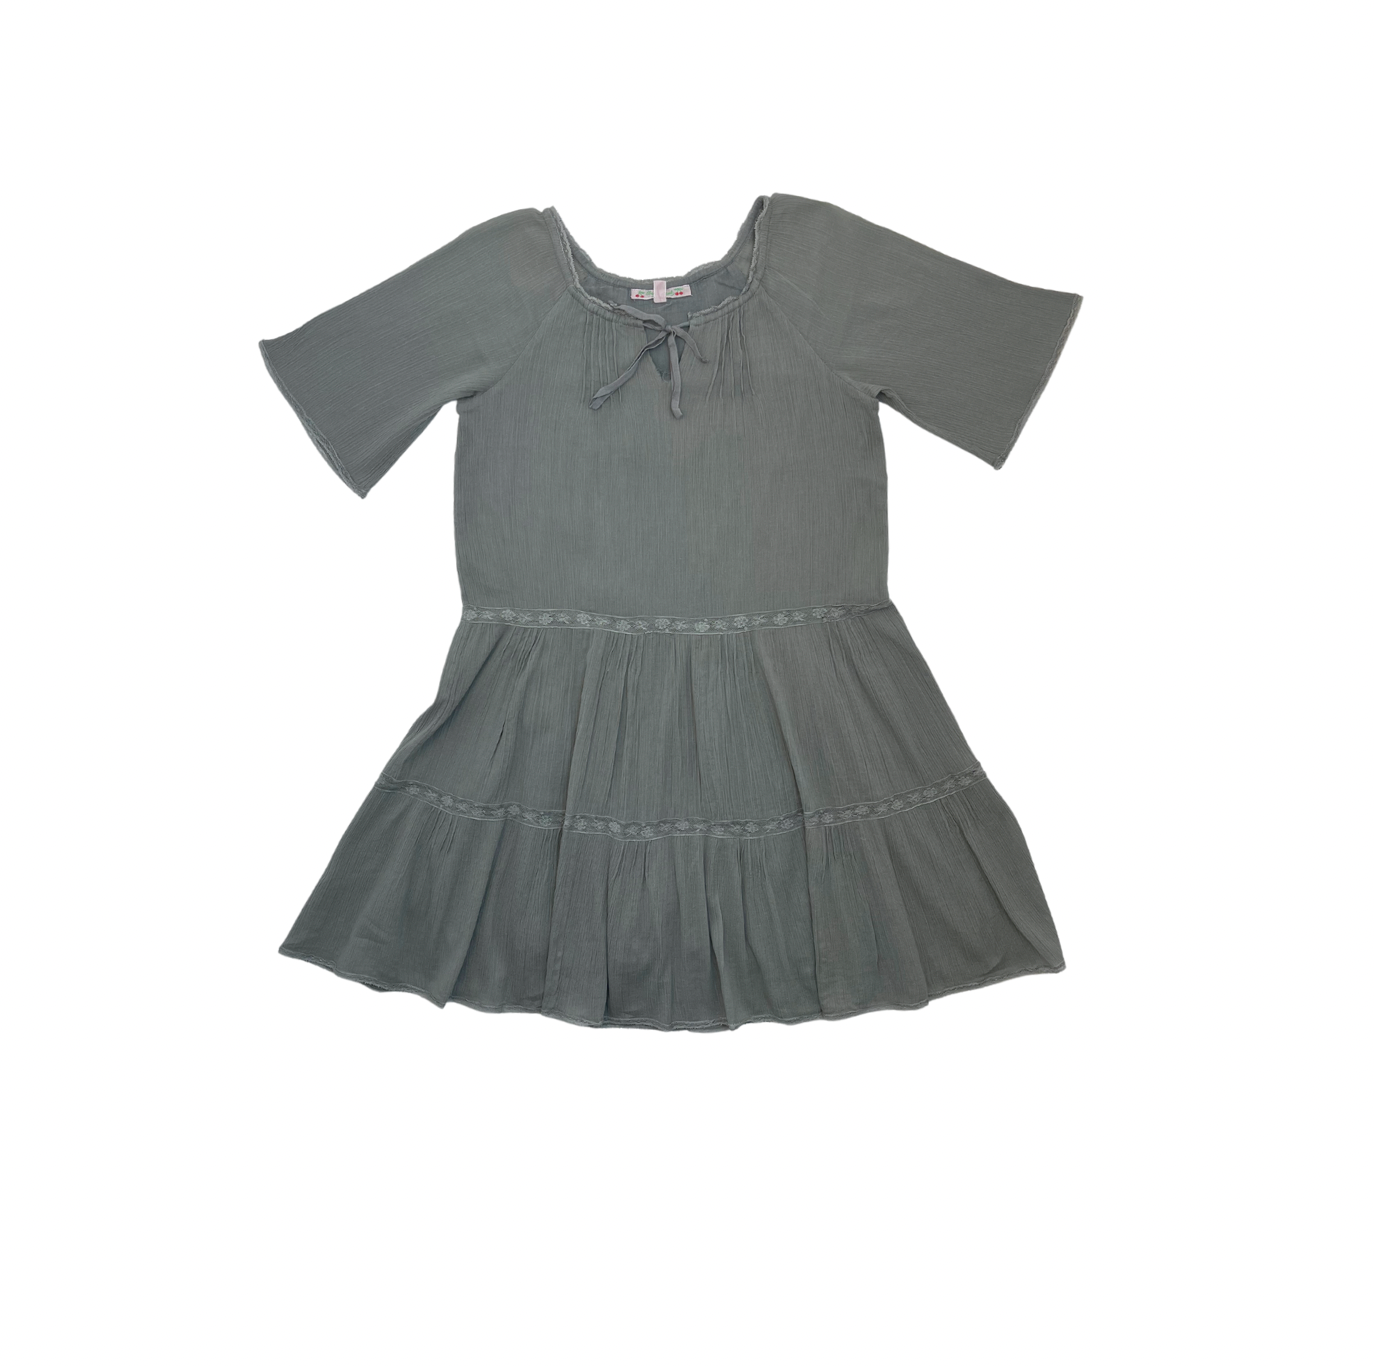 BONPOINT - Gray dress - 6 years old